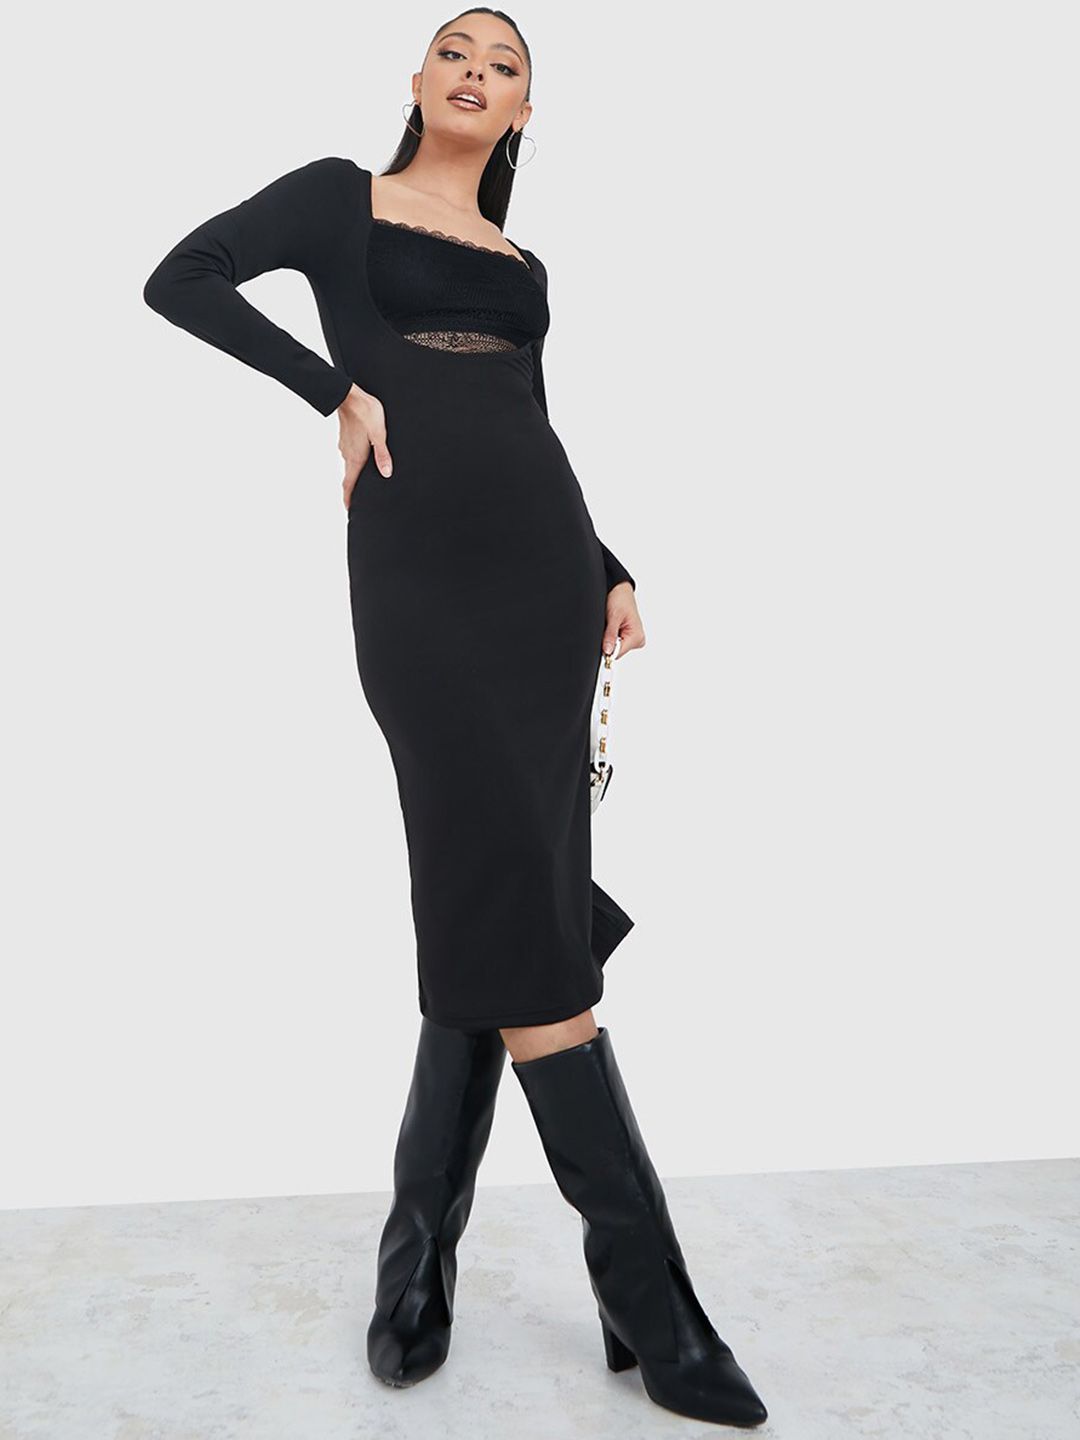 Styli Black Solid Bodycon Dress Price in India